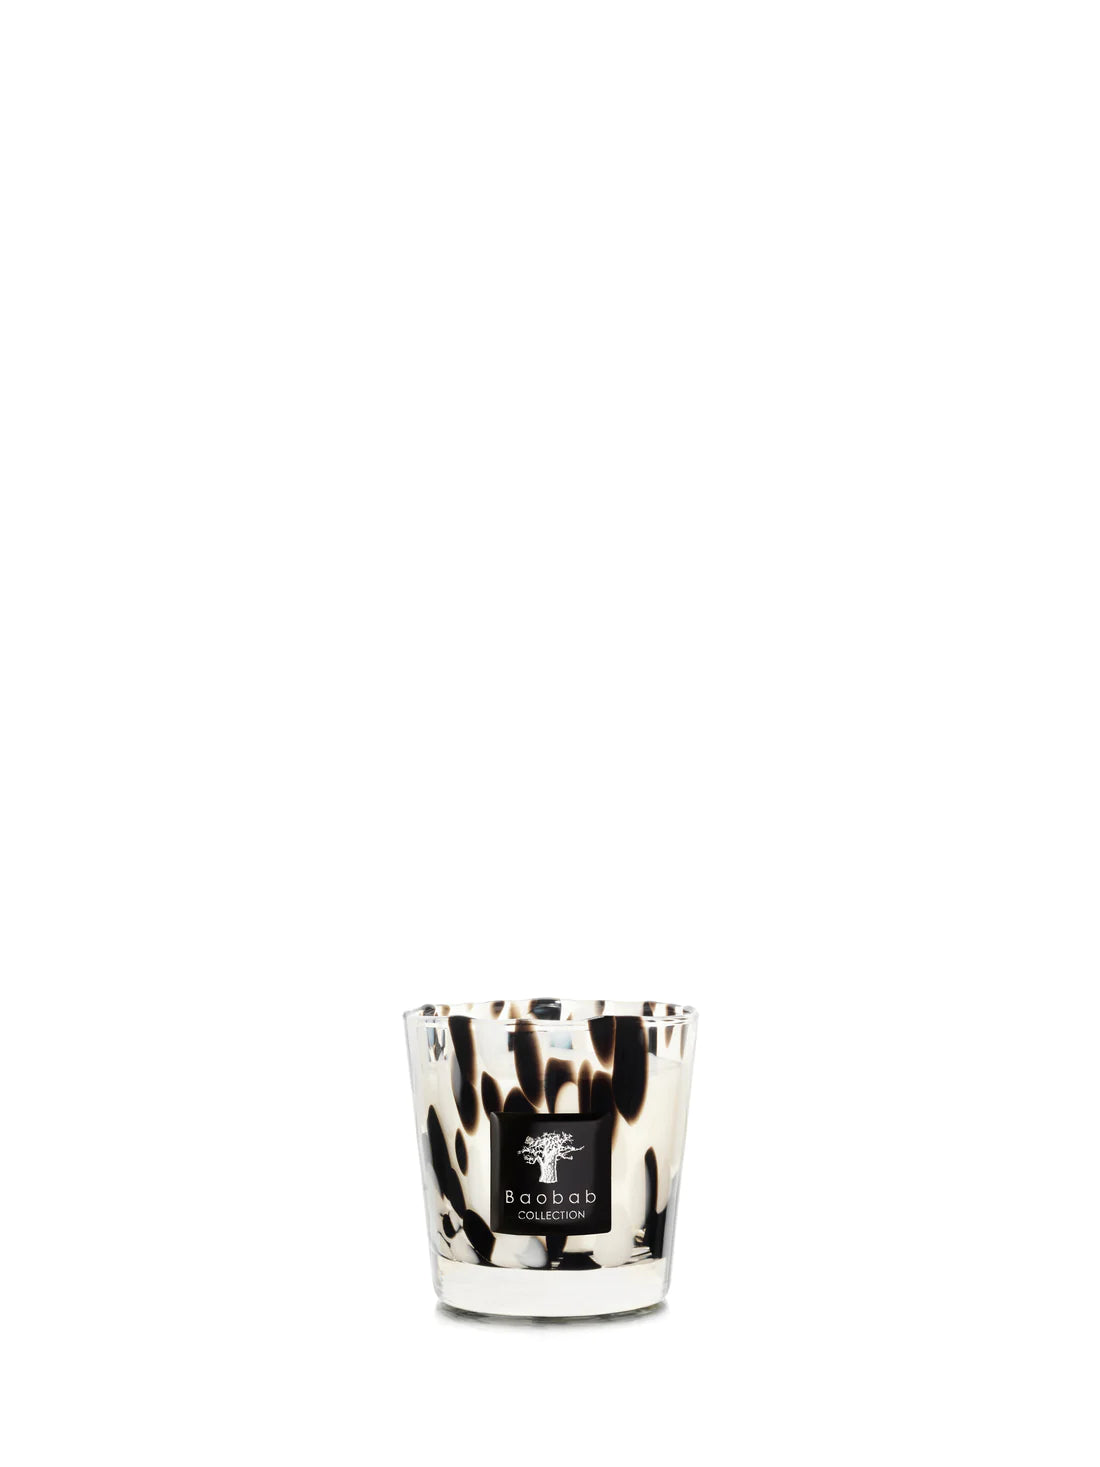 BAOBAB COLLECTION, Pearls Black MAX16 Scented Candle 1.1kg